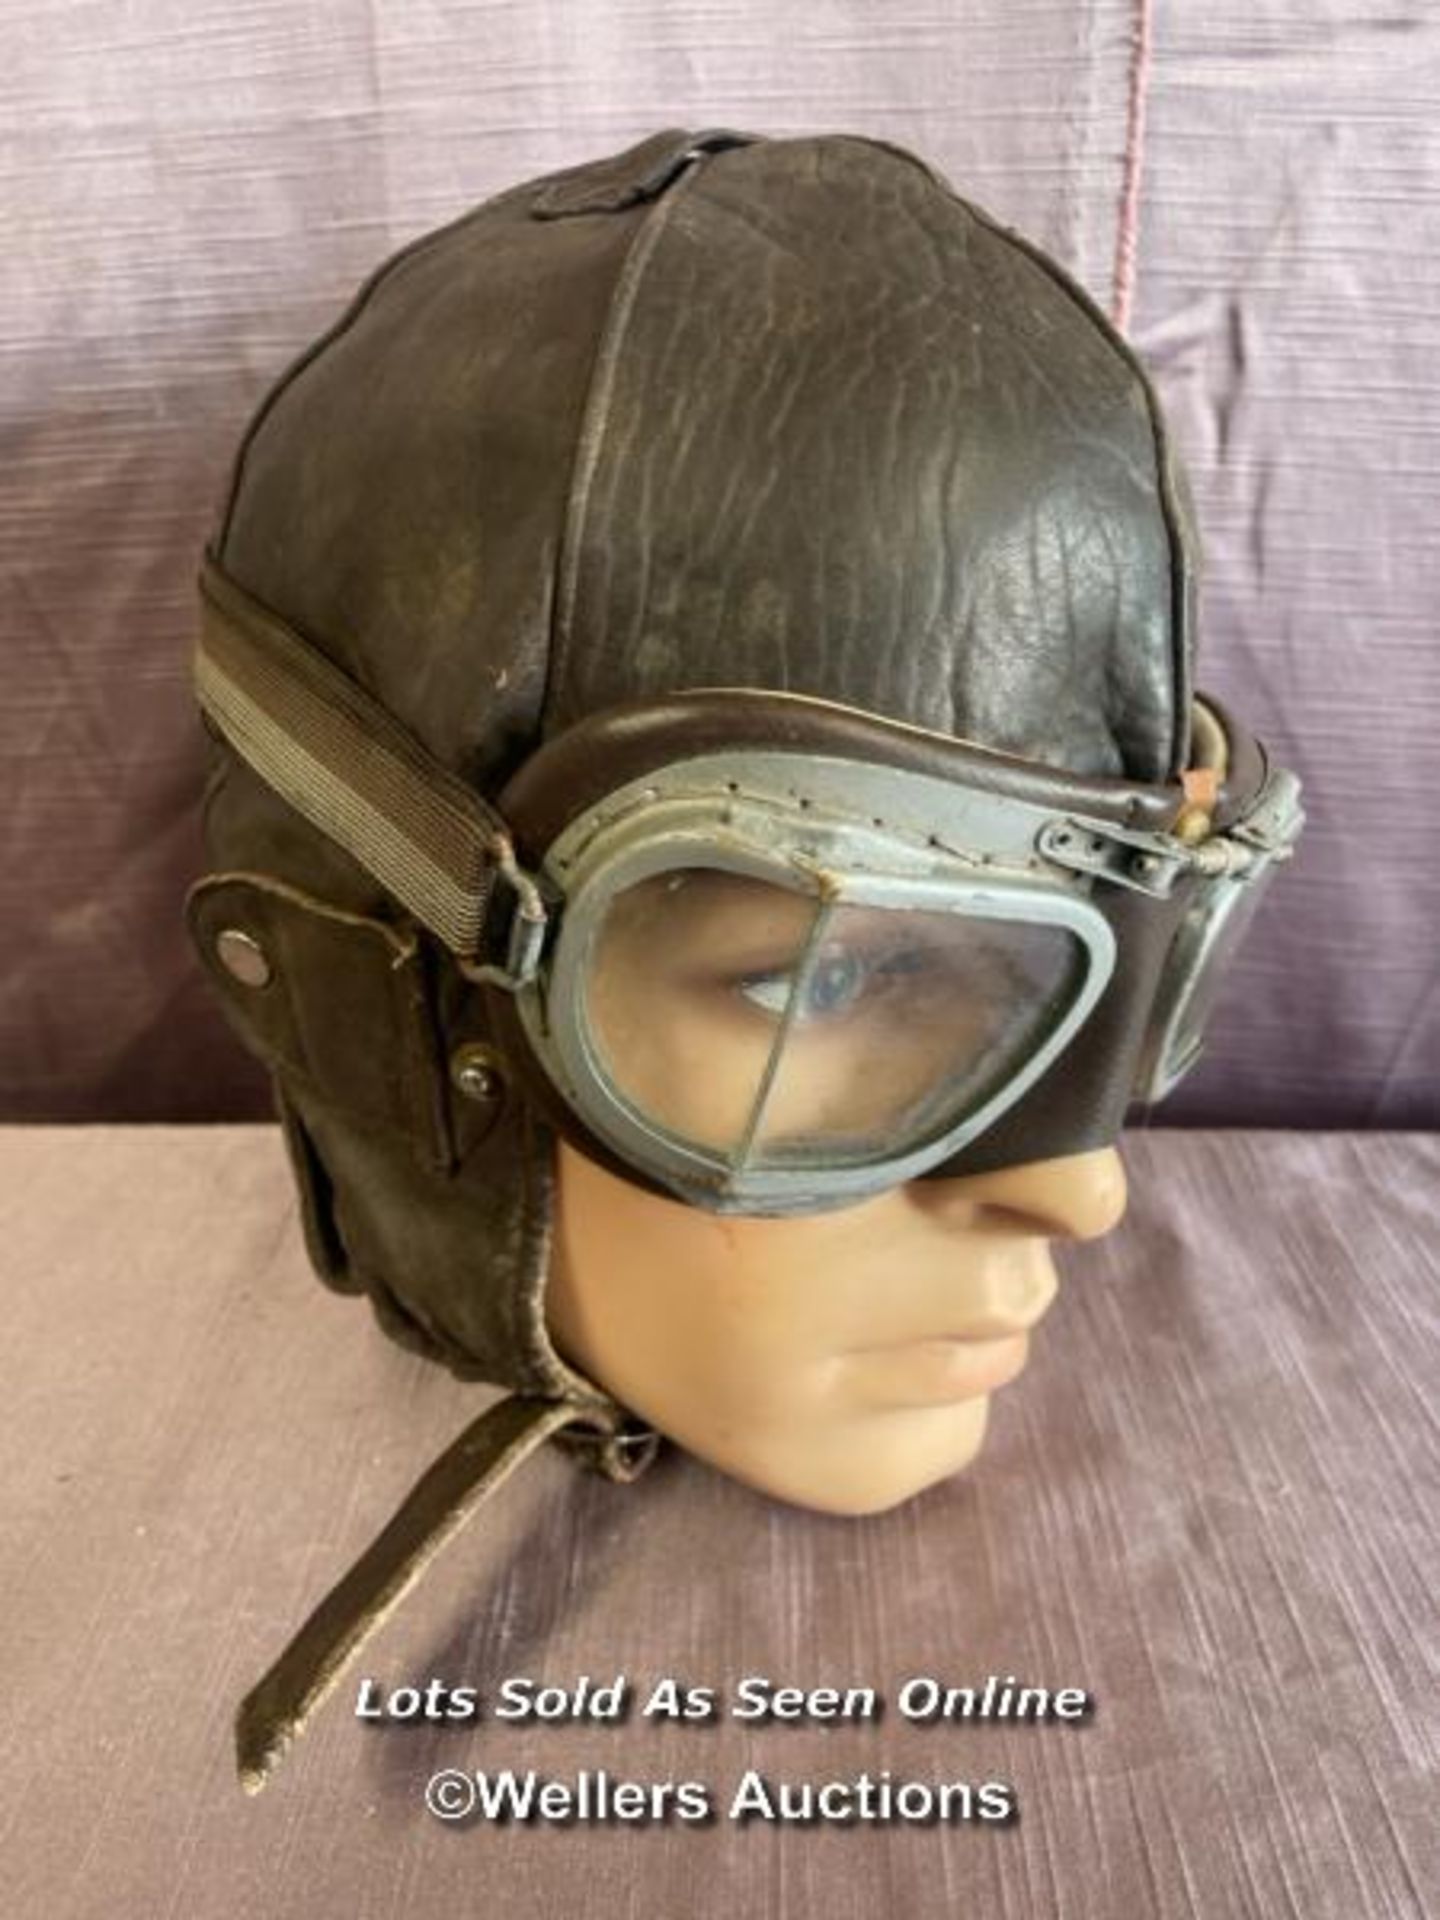 PRE WAR LEATHER FLYING OR DRIVING HELMET WITH ASSOCIATED GOGGLES - Image 2 of 4